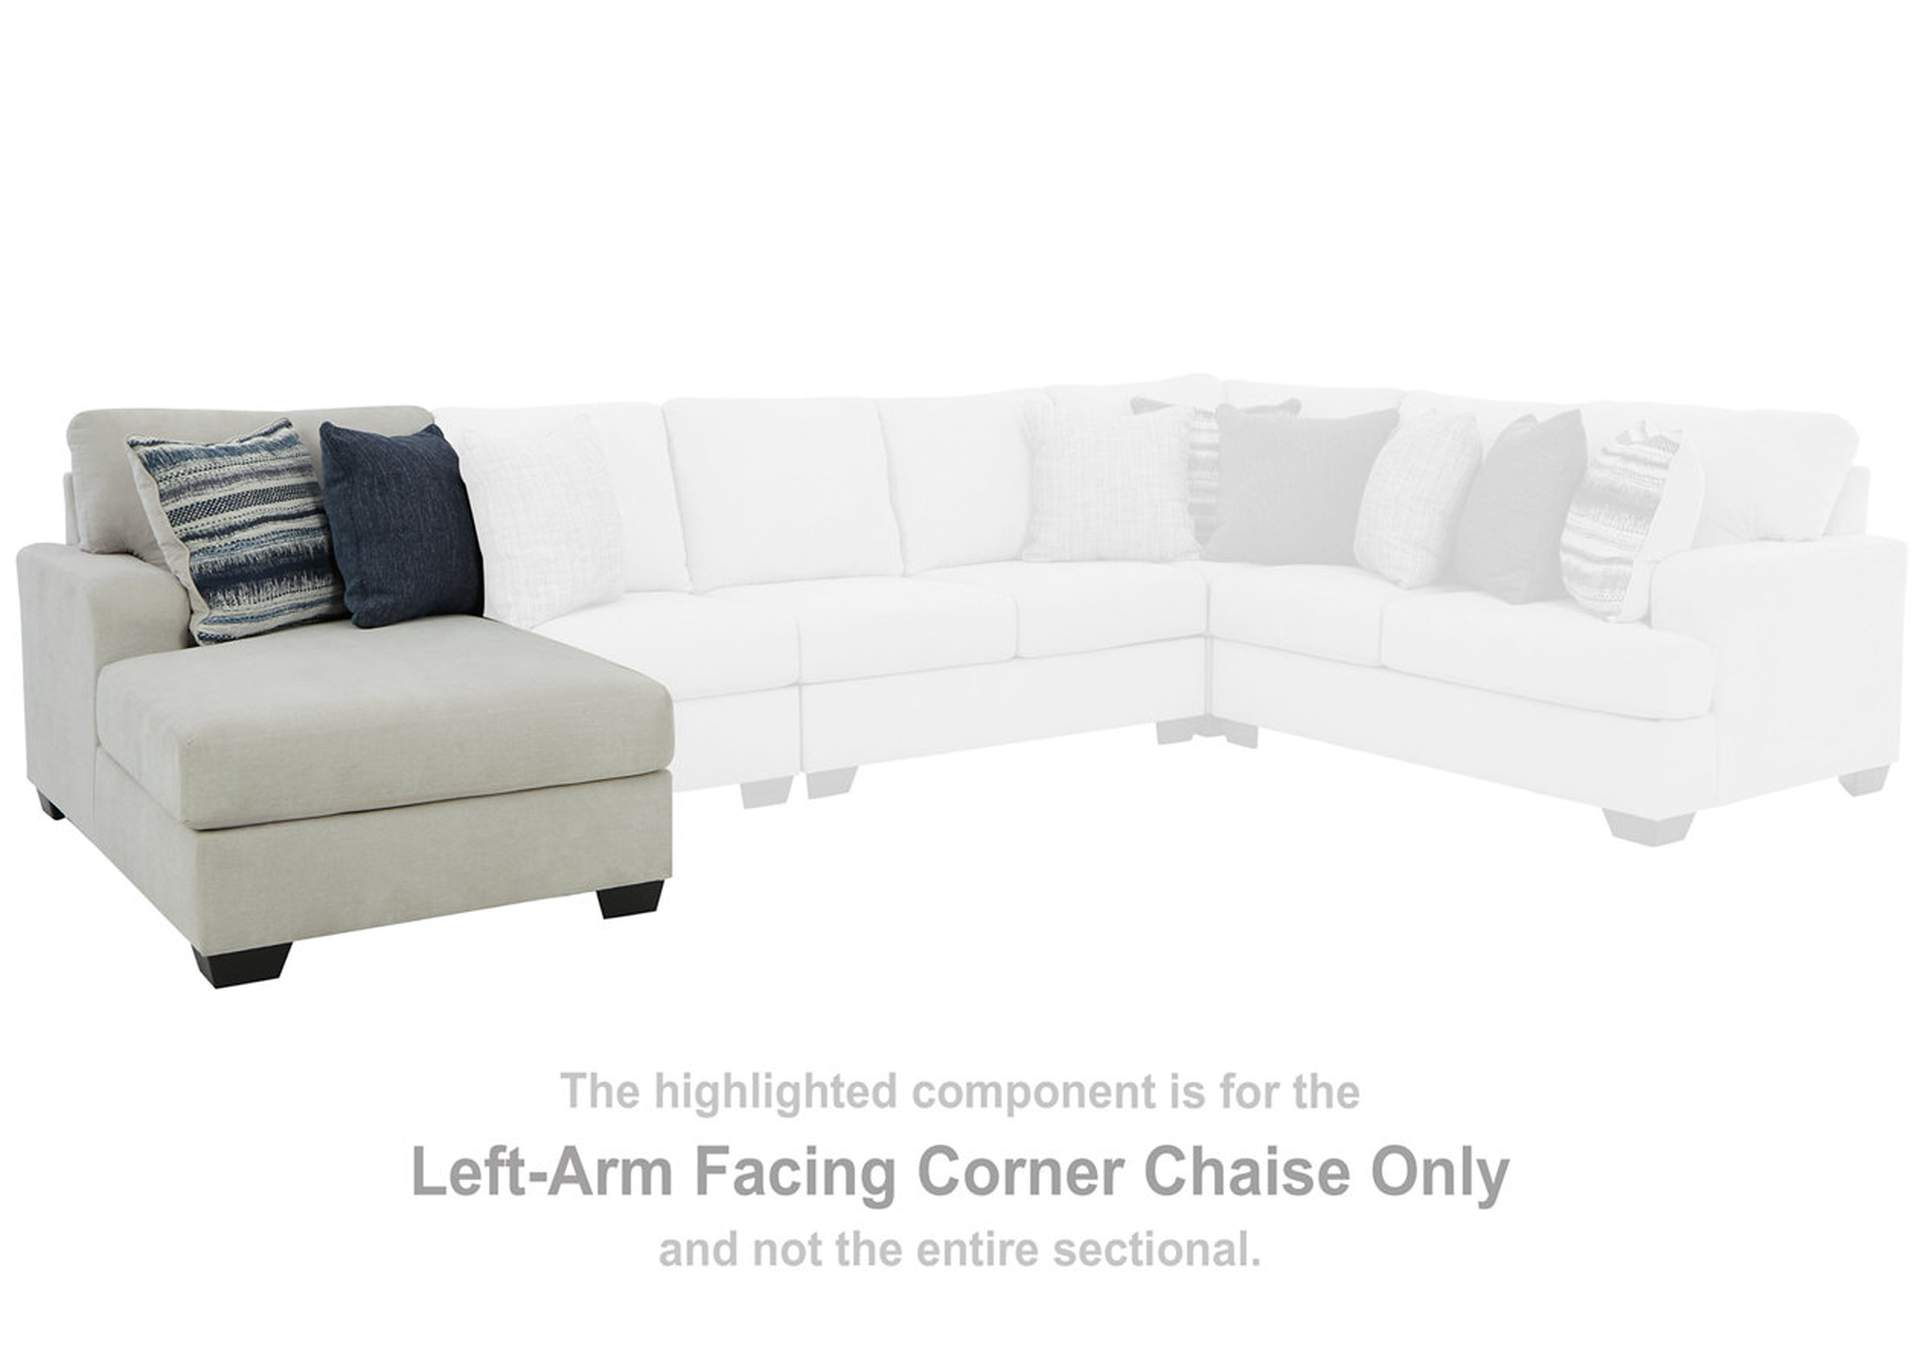 Lowder 5-Piece Sectional with Chaise,Benchcraft